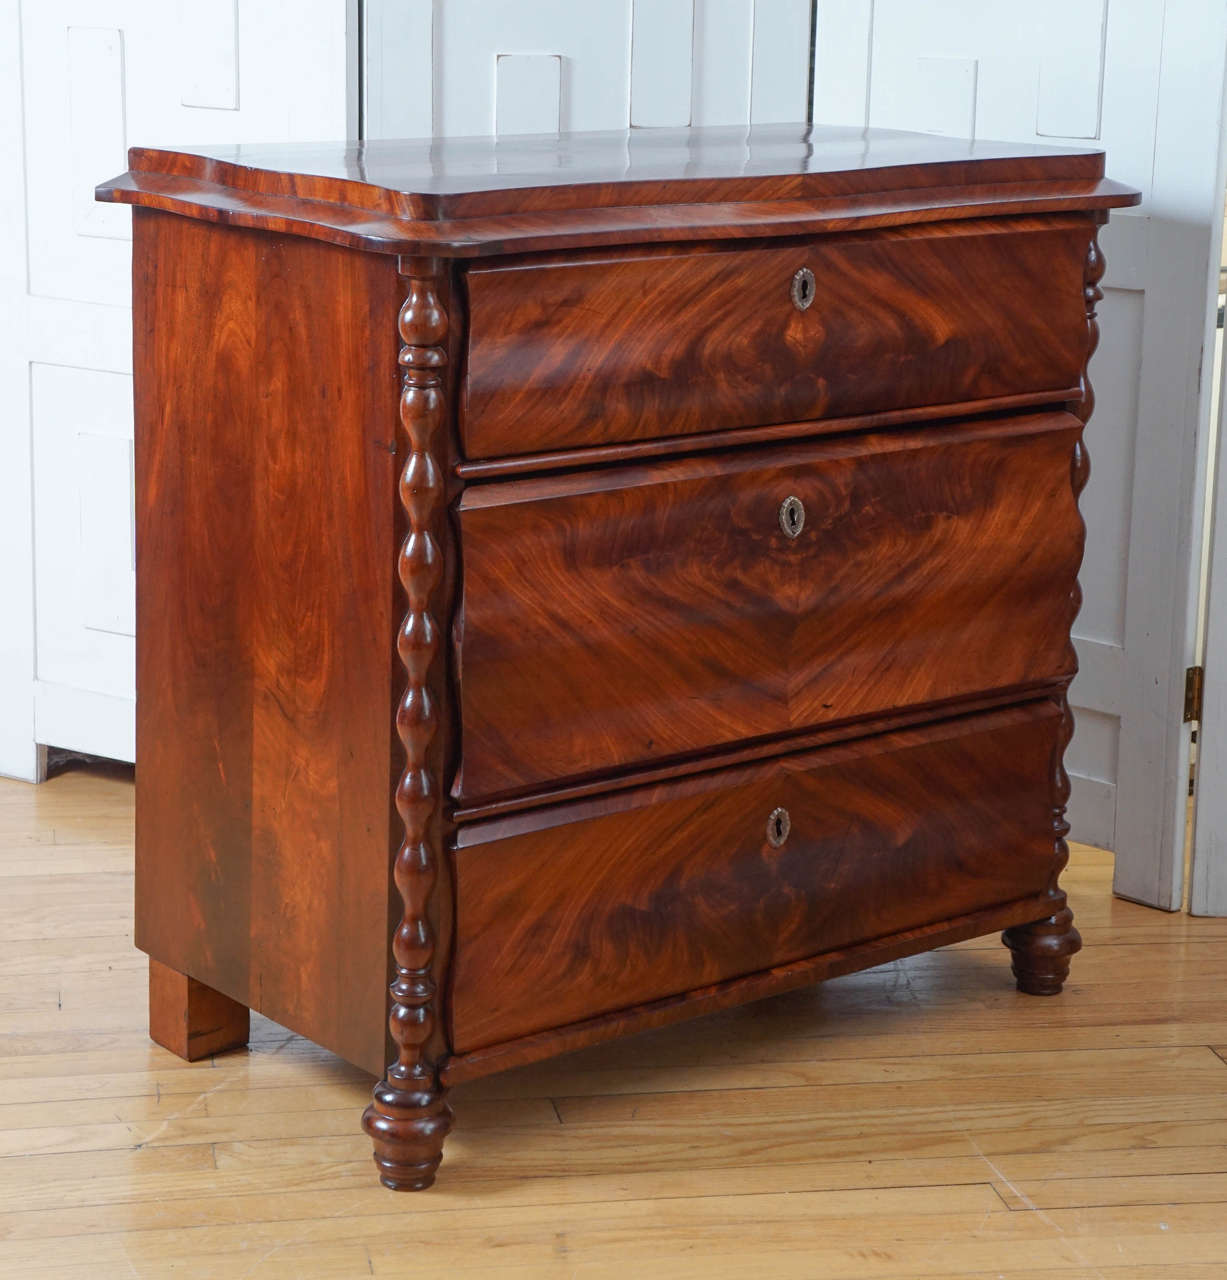 Biedermeier chest of drawers with carved details and flame mahogany drawer fronts.